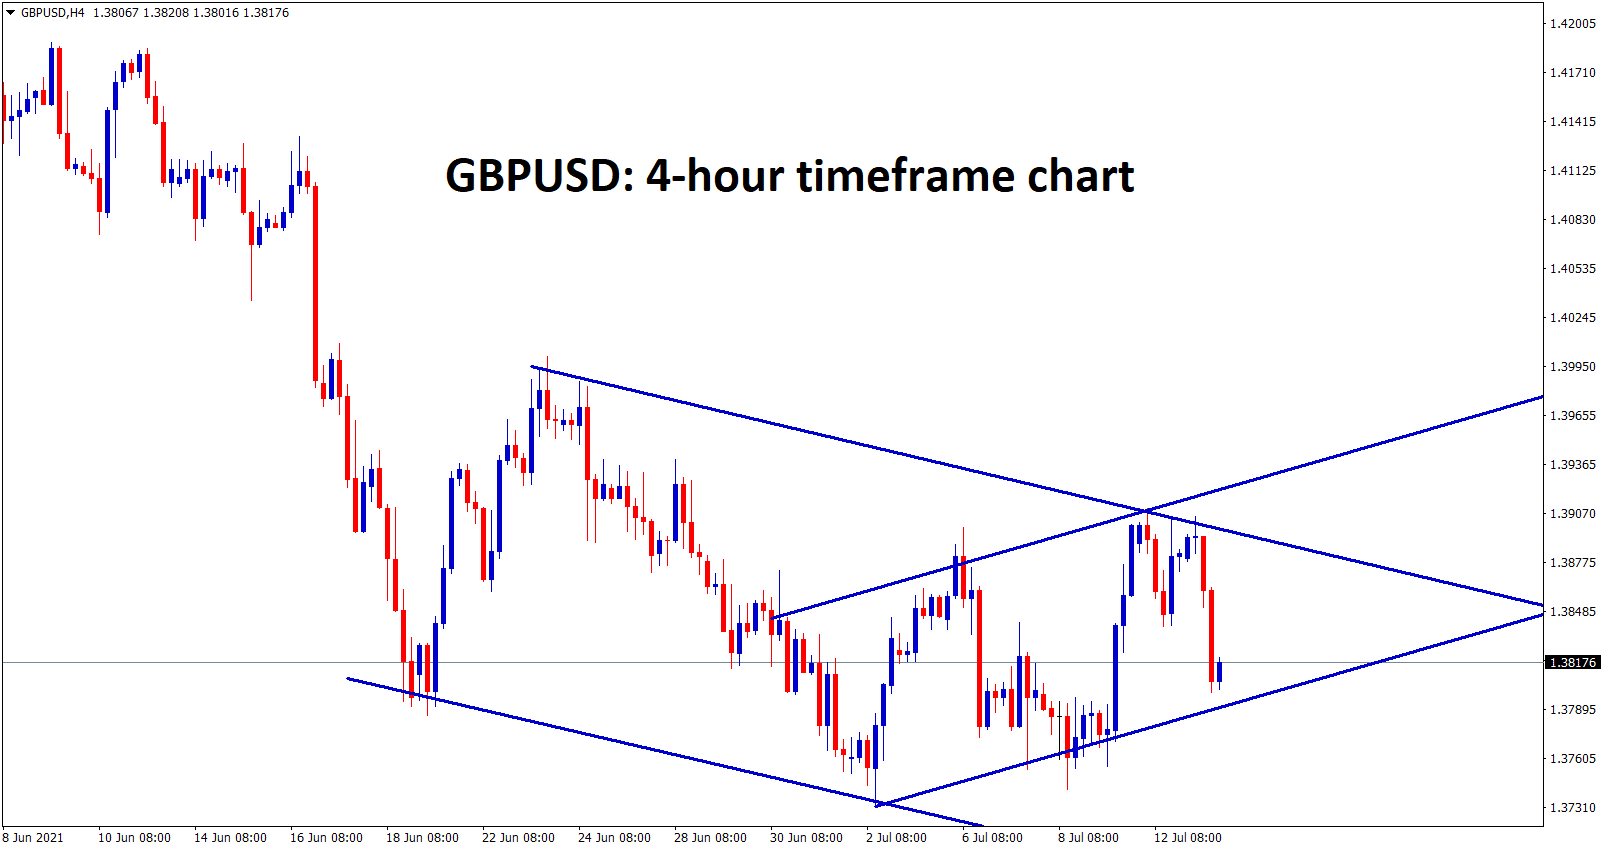 GBPUSD is moving in a channel ranges